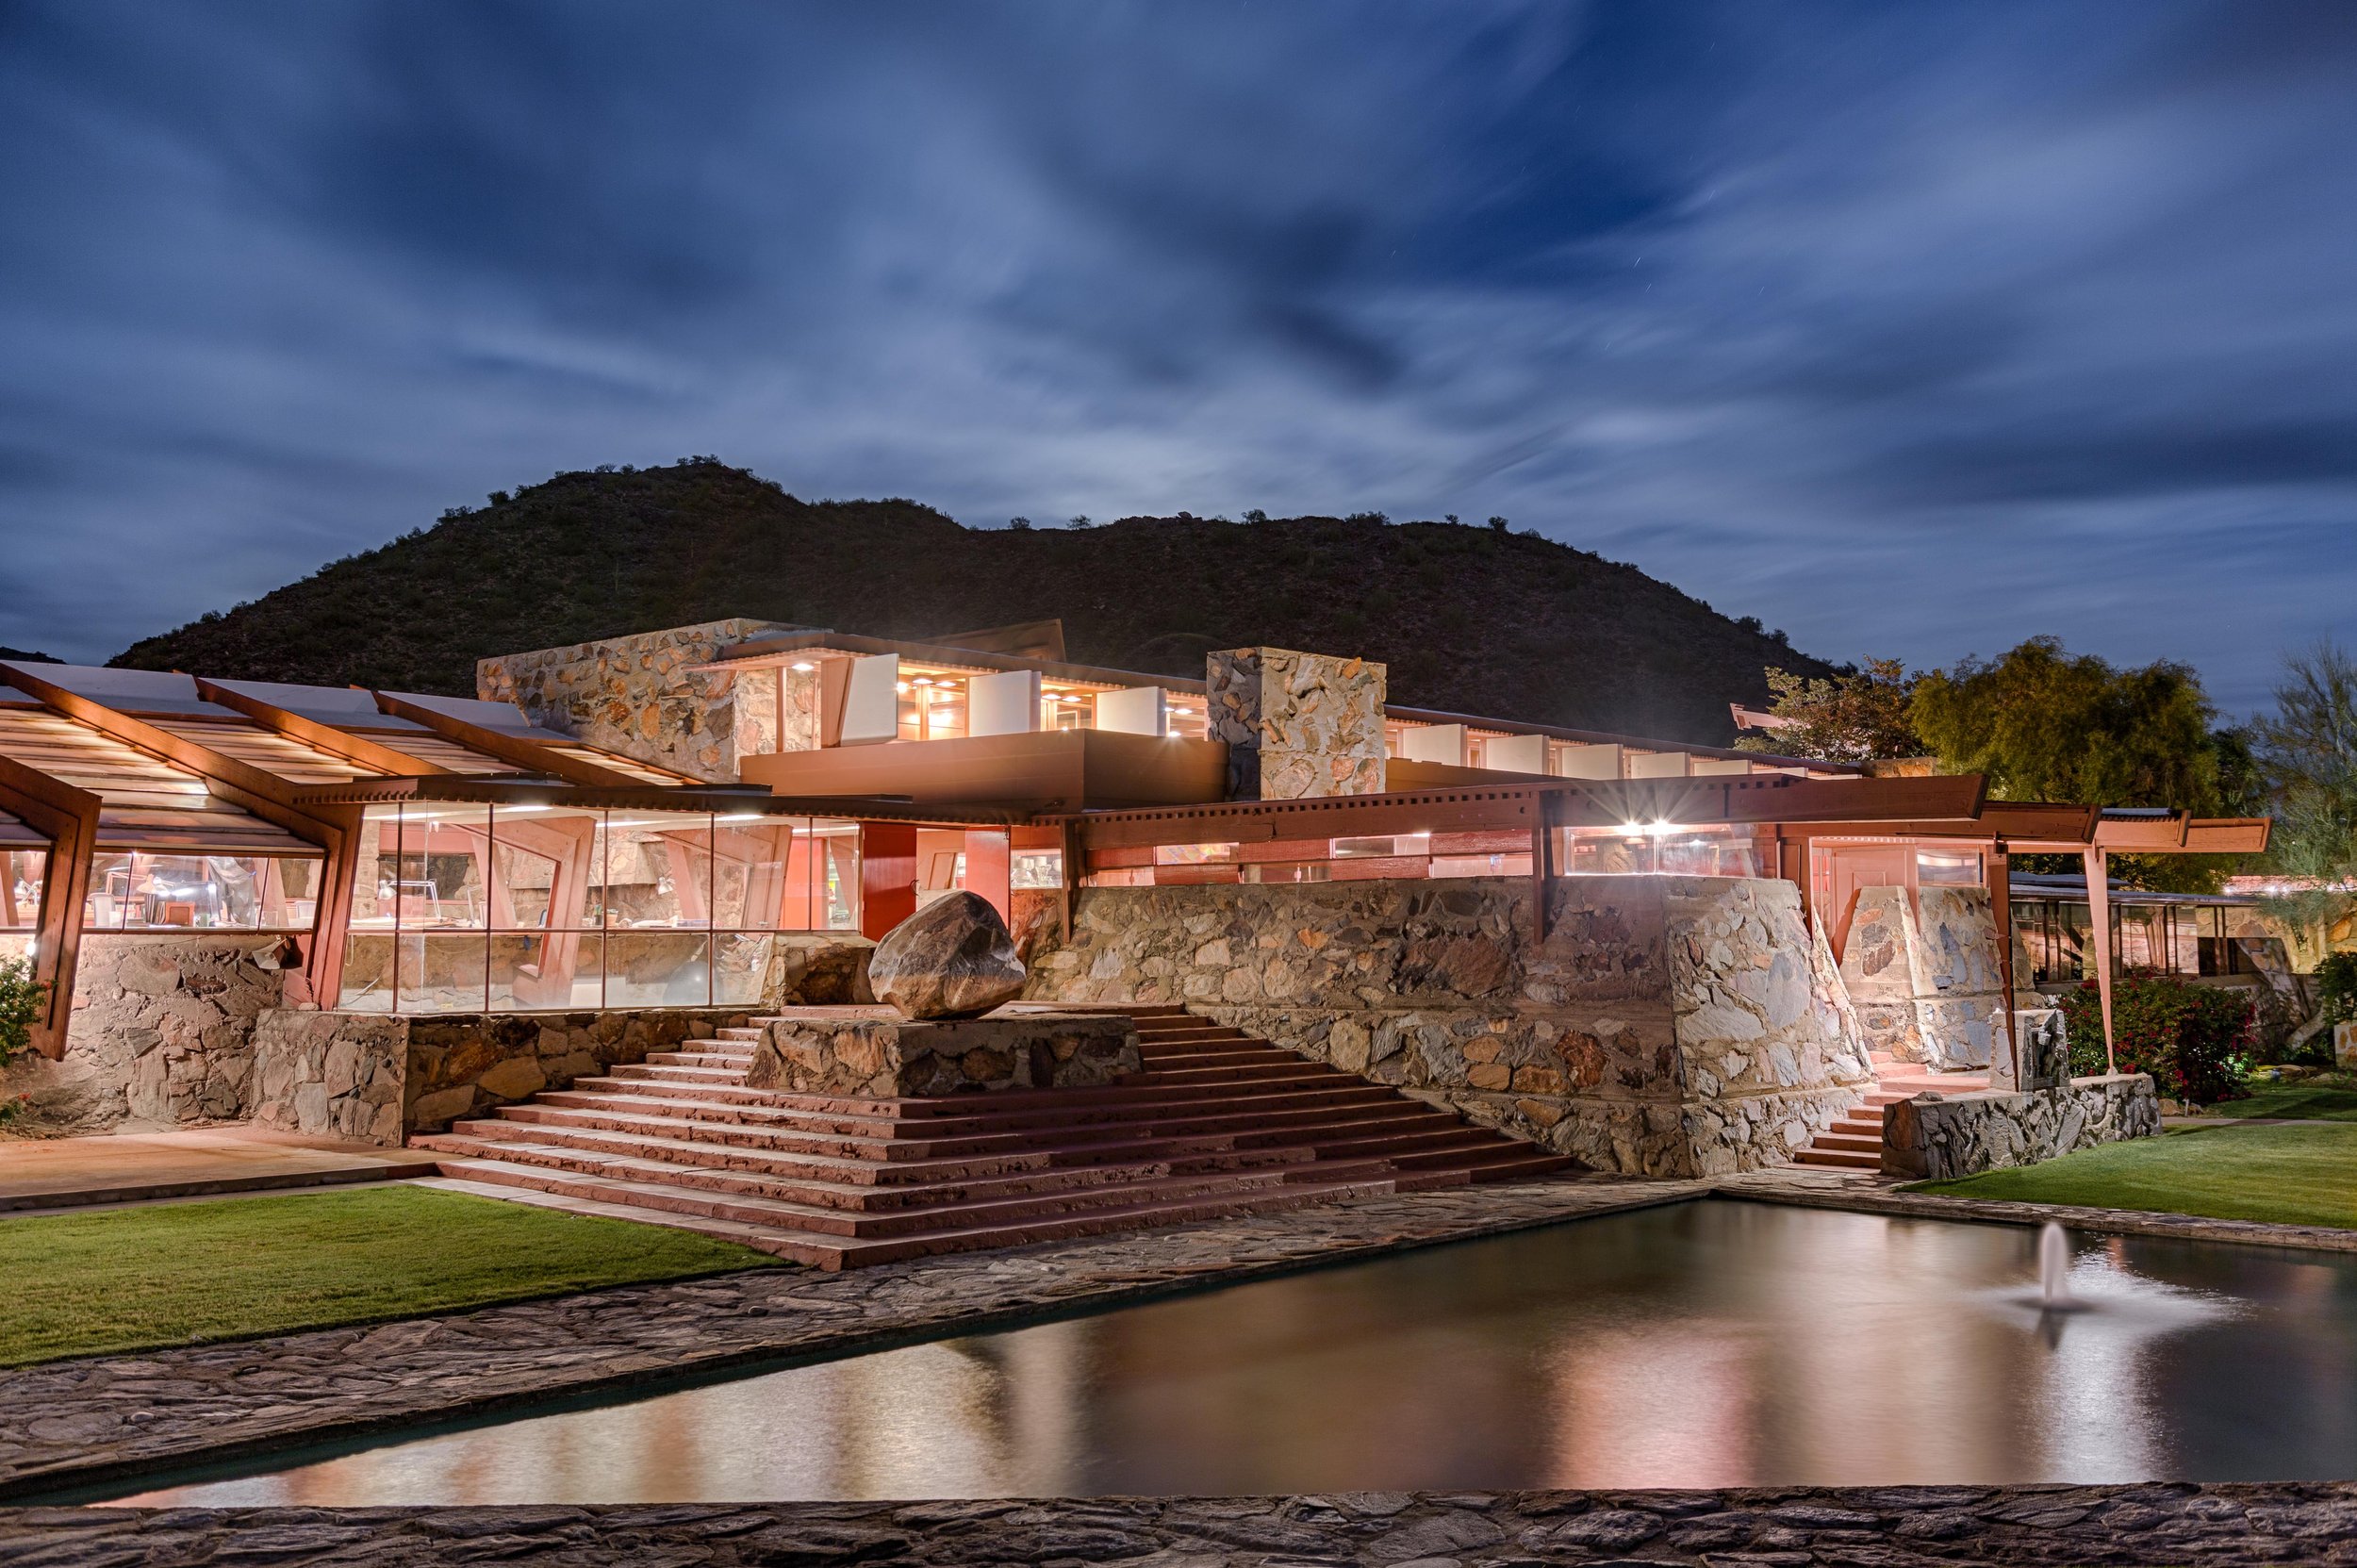 2017 Taliesin West_Front evening_photo credit Andrew Pielage.jpg